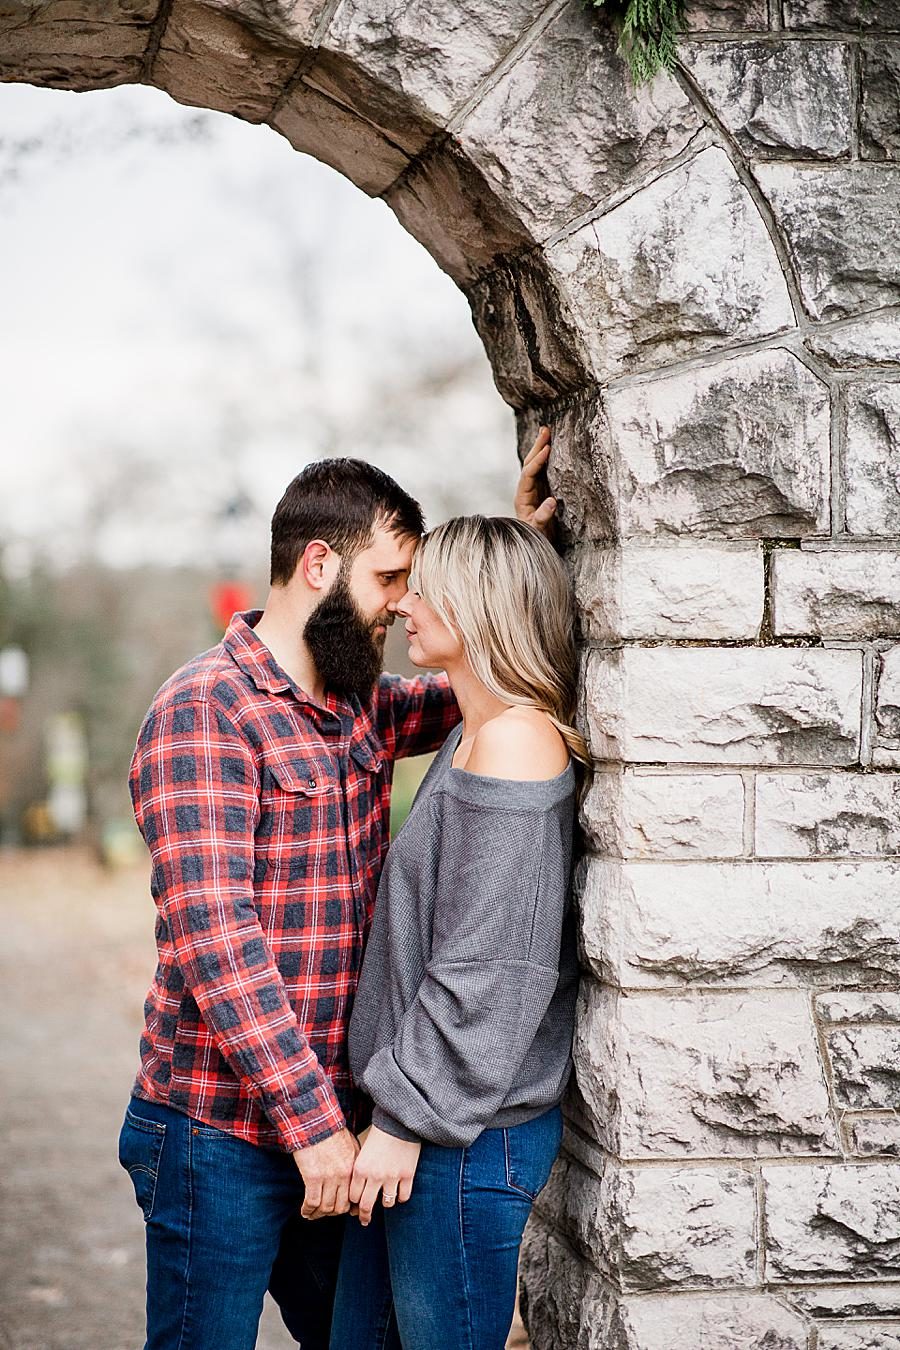 Off the shoulder sweatshirt by Knoxville Wedding Photographer, Amanda May Photos.